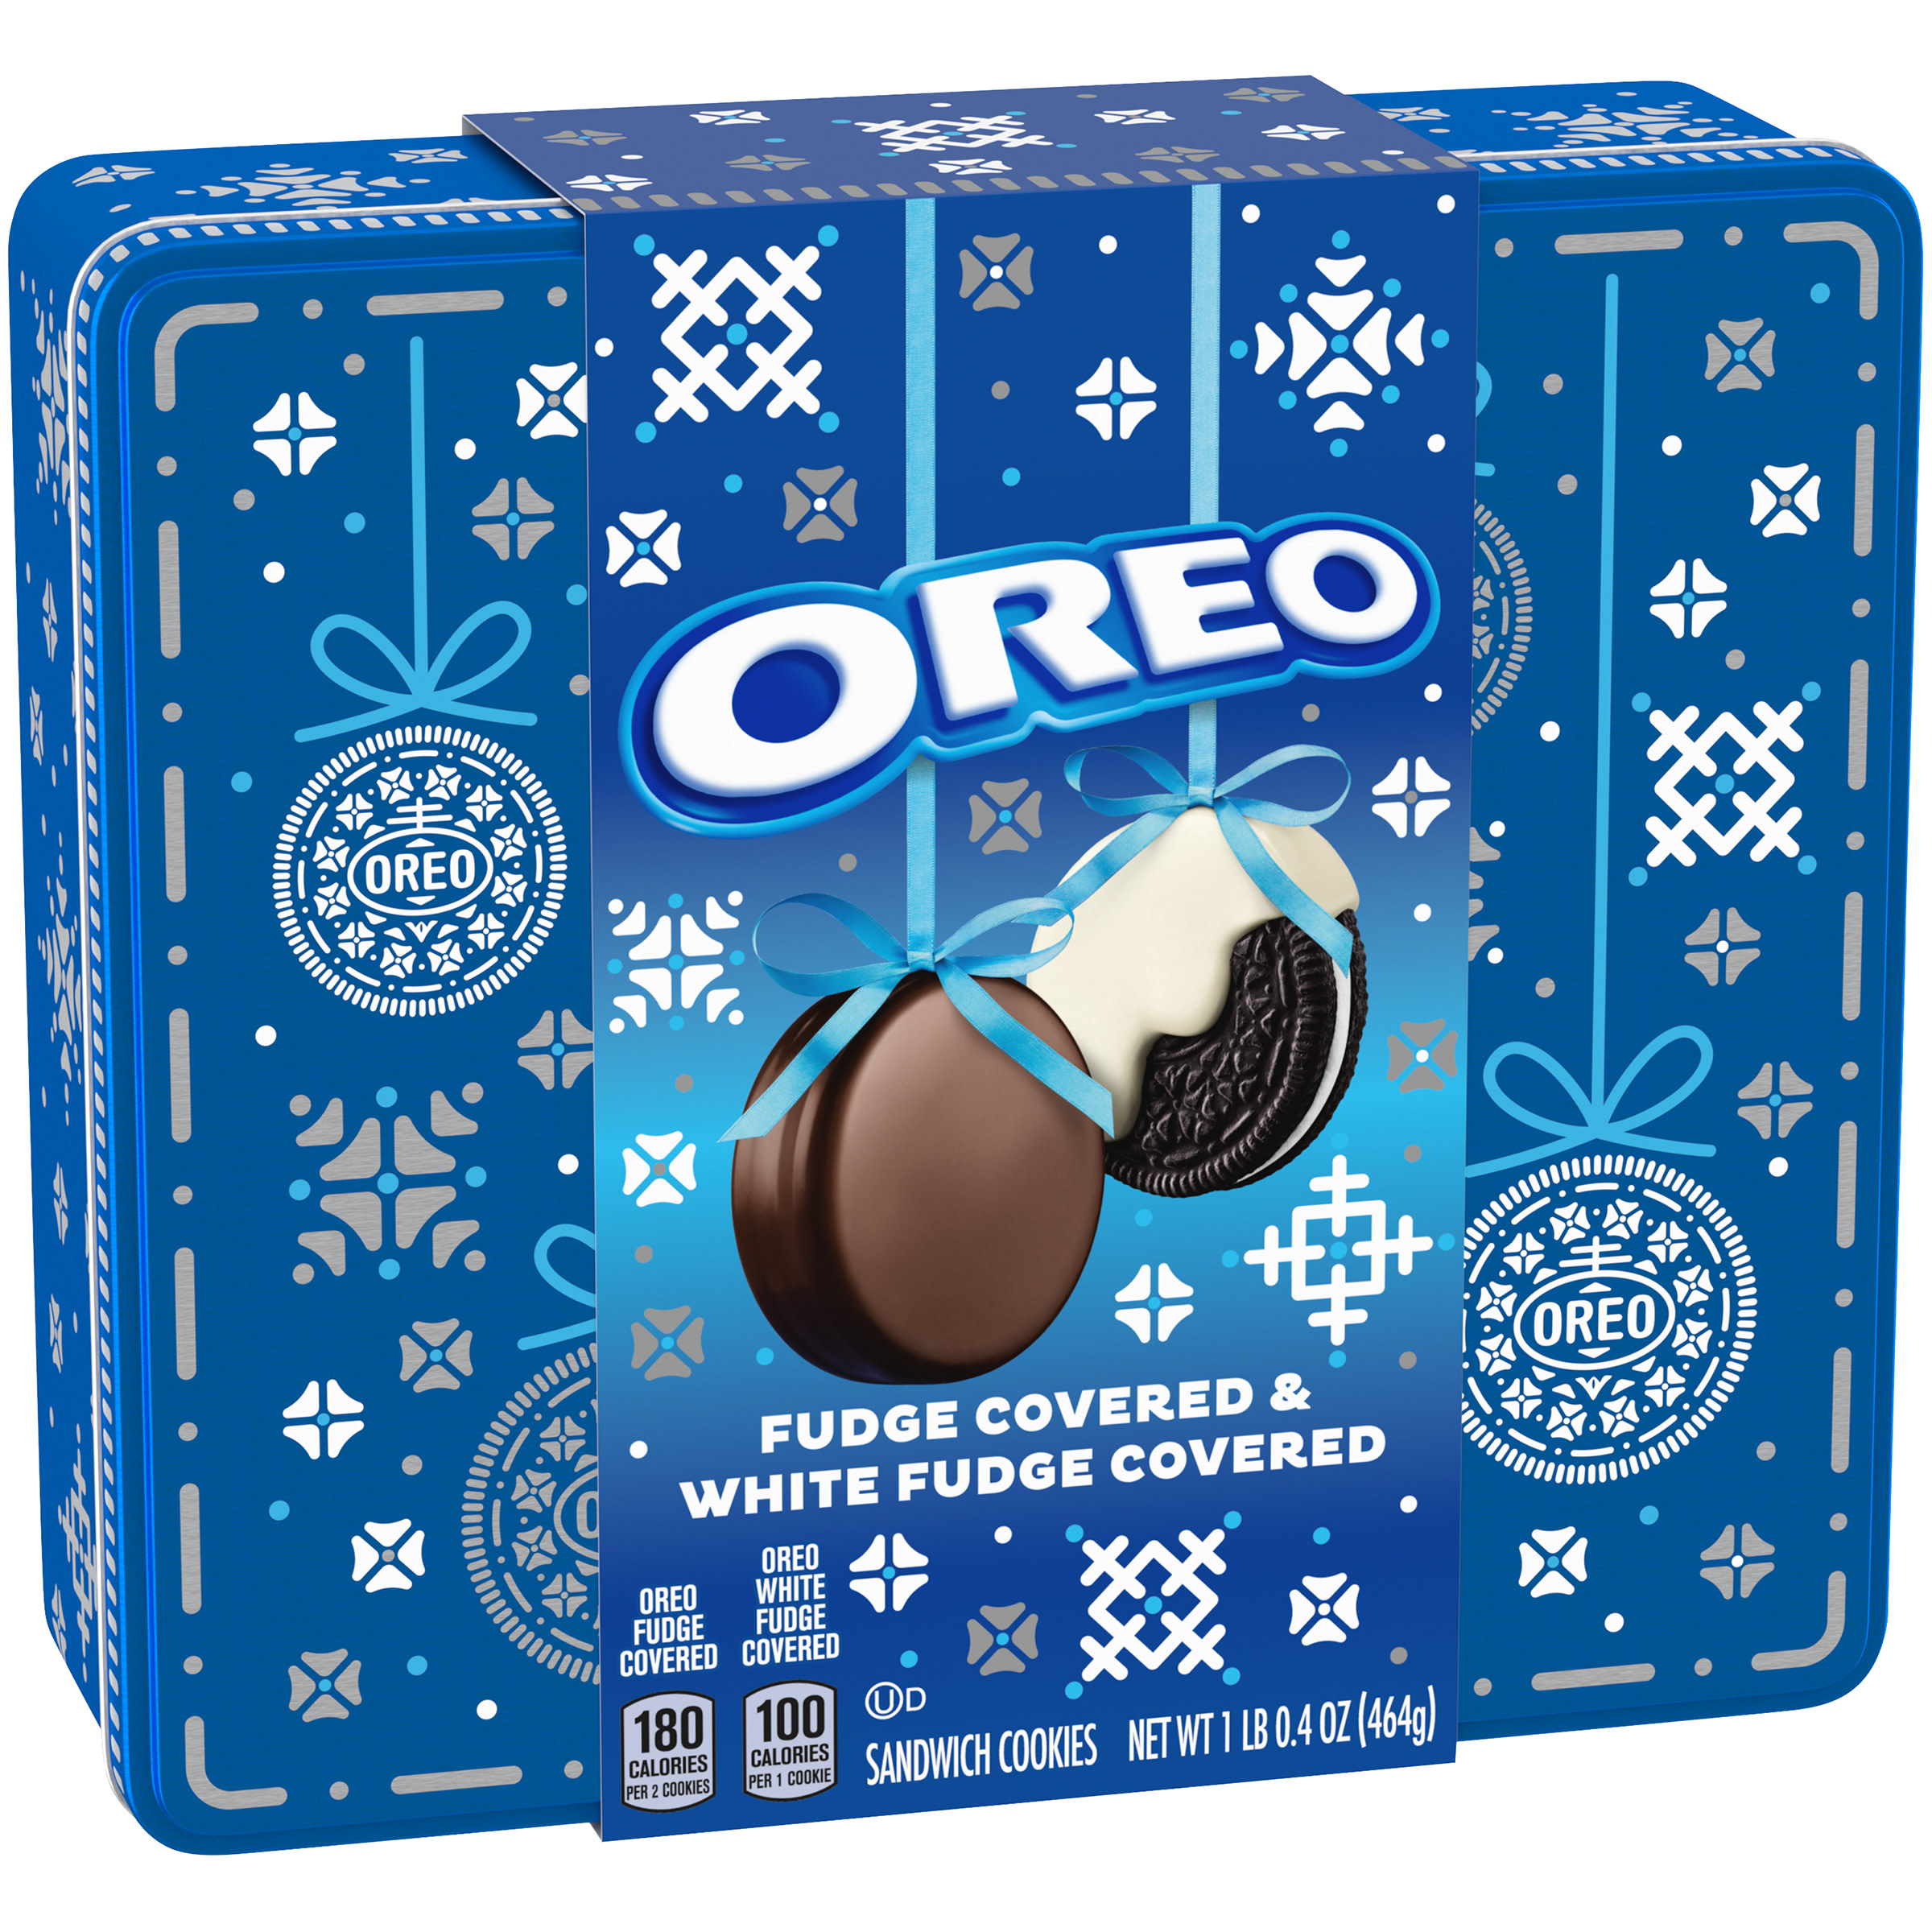 Oreo Fudge Covered & White Fudge Covered Sandwich Holiday Cookies, 1.03 Lb Holiday Tin (24 Cookies) - image 2 of 9